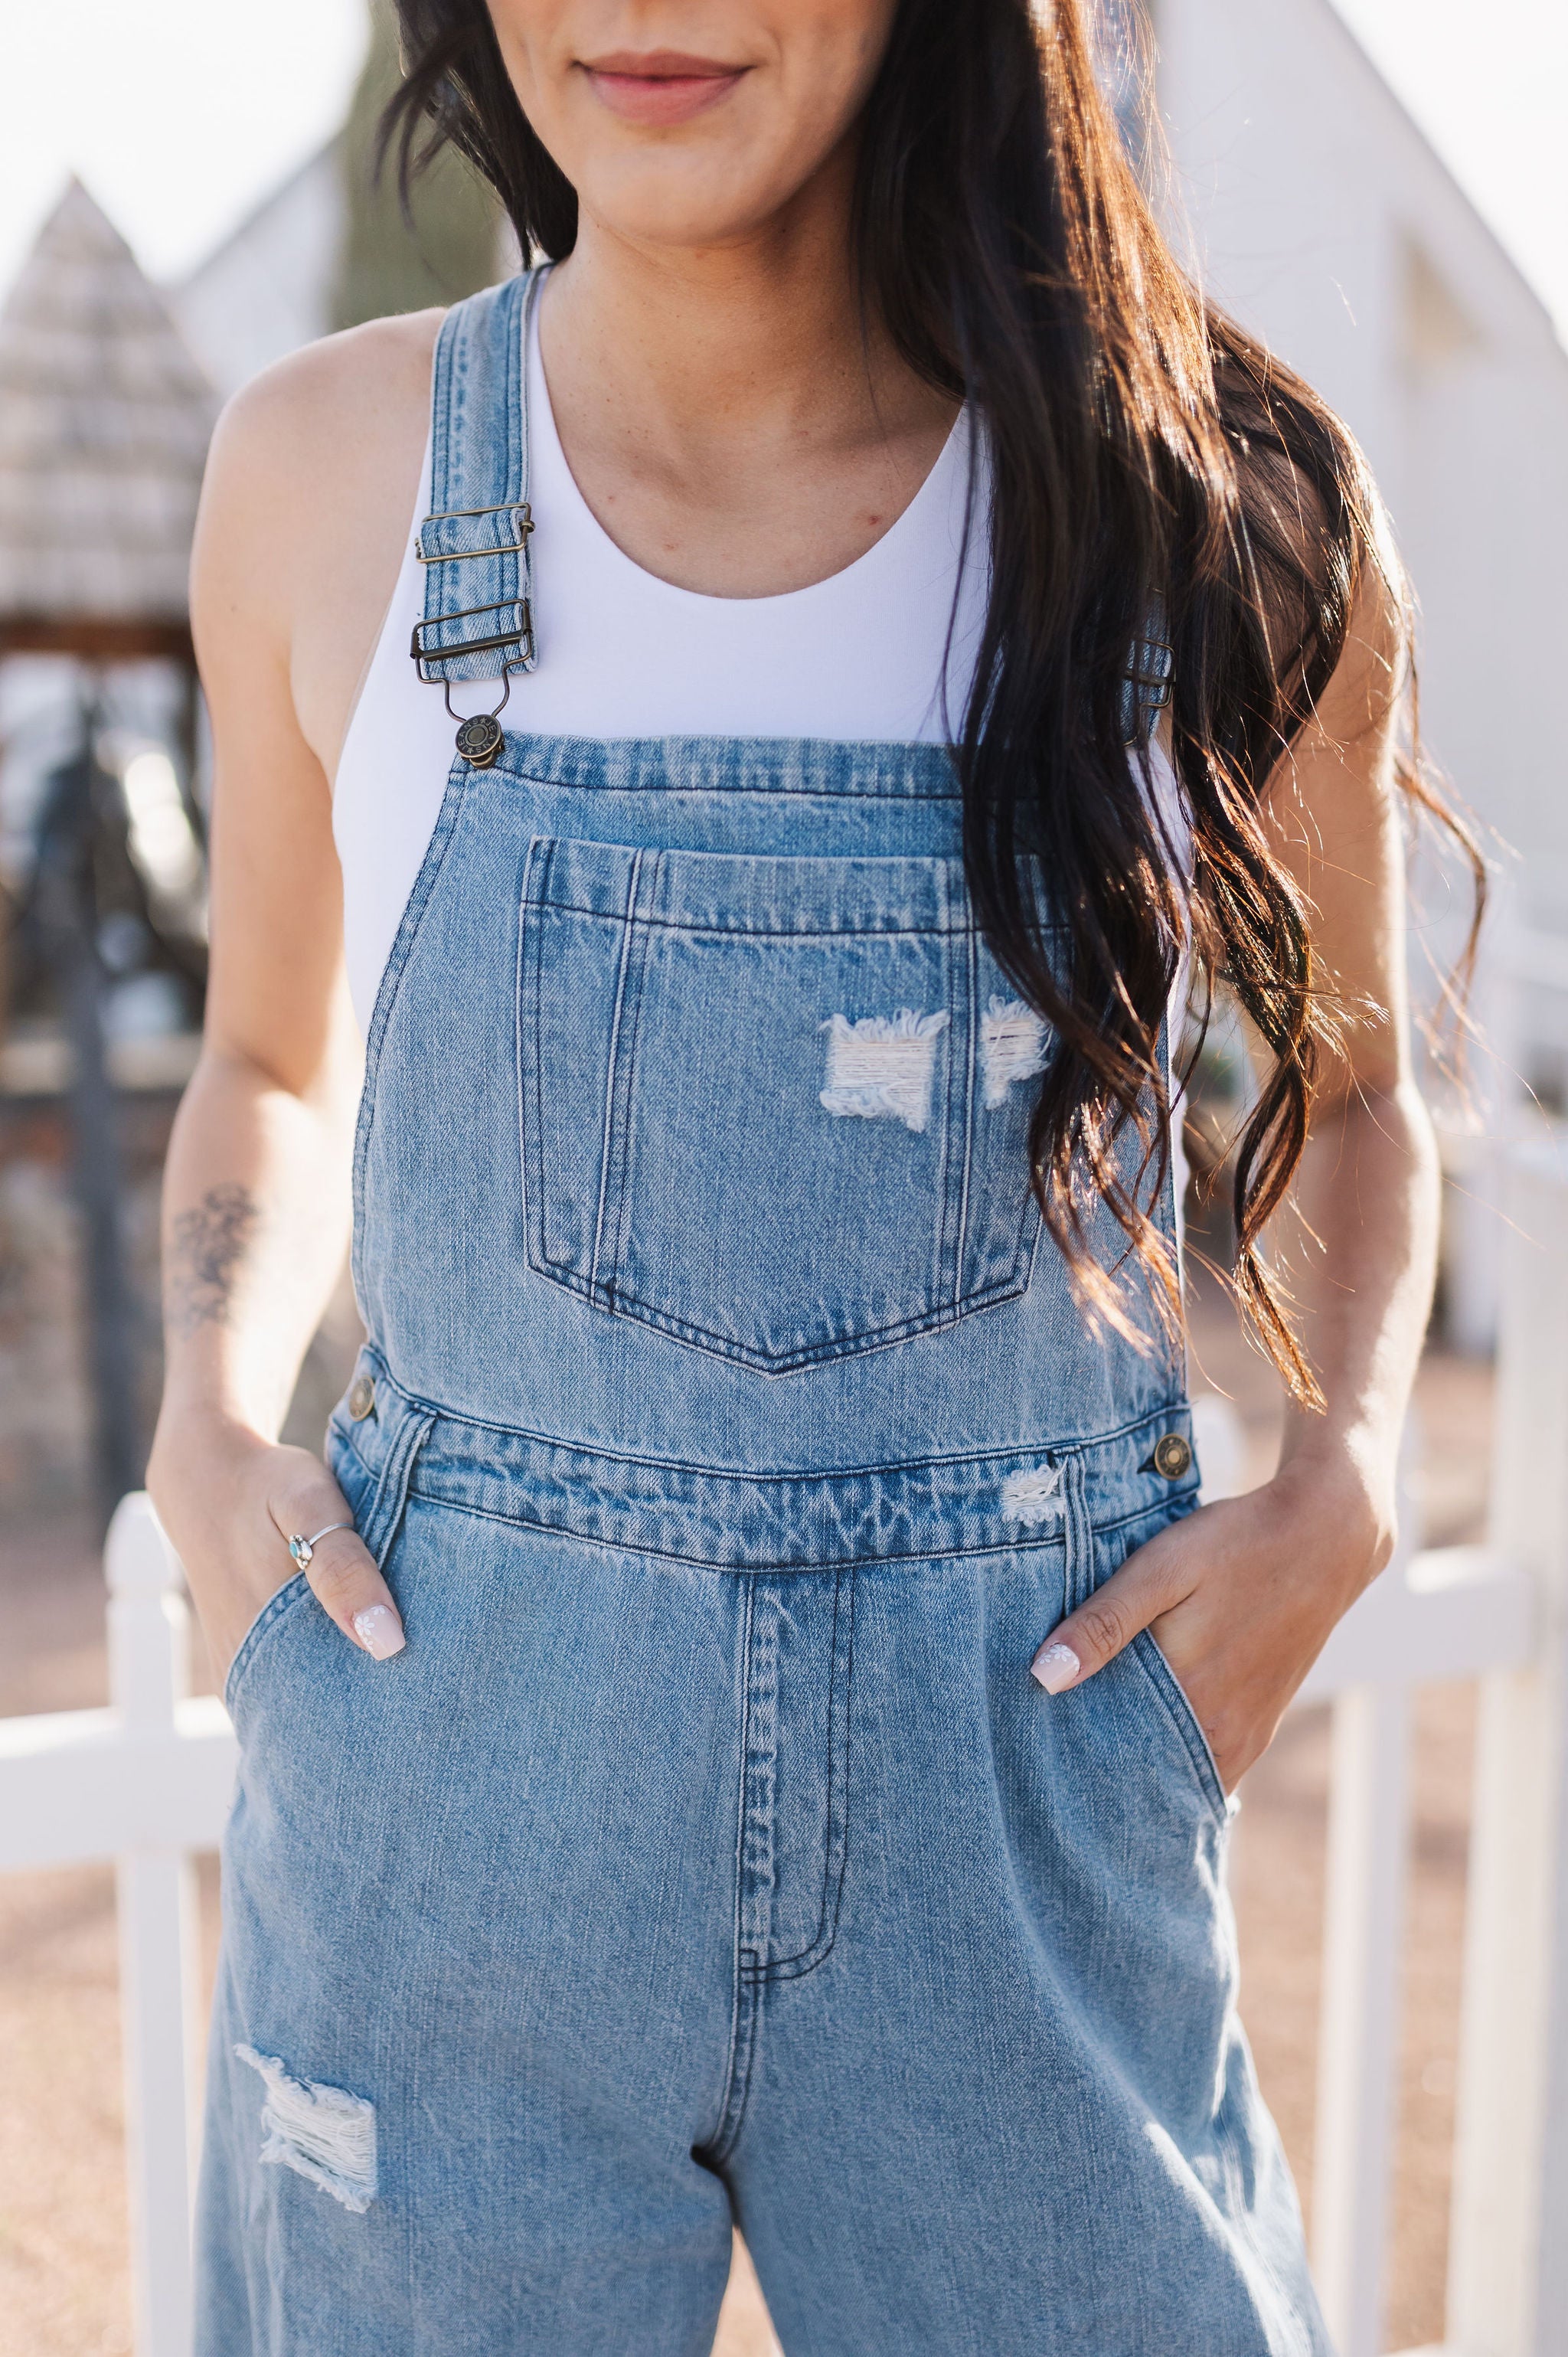 Close up front view of Clementine Wide Leg Distressed Denim Overalls with adjustable straps, front and side pockets, and heavy distressing details. 